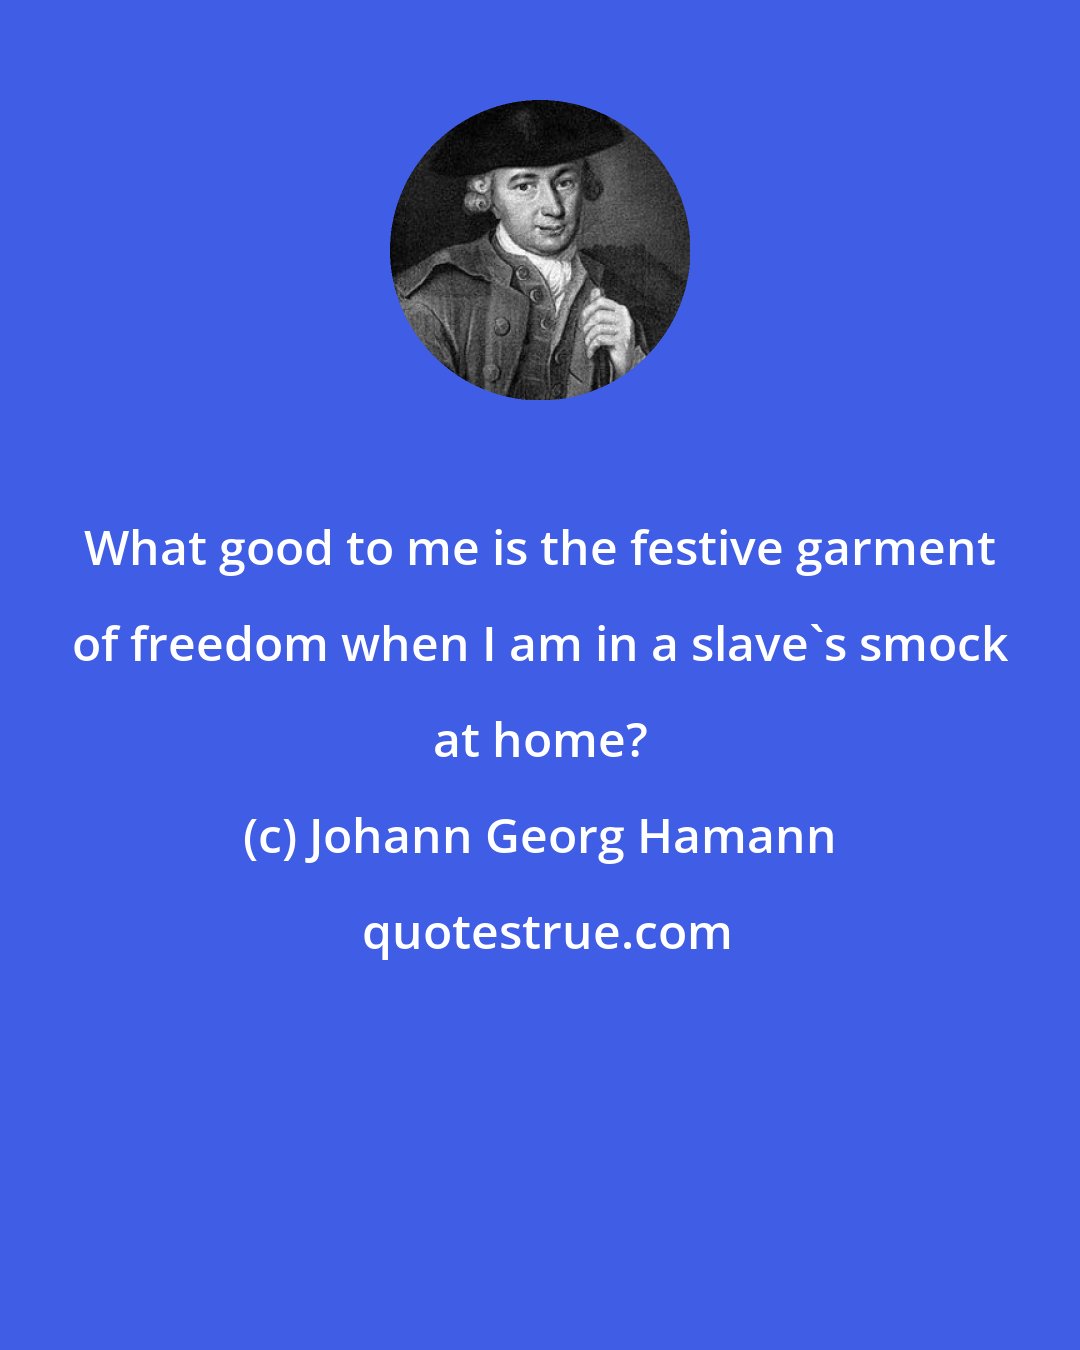 Johann Georg Hamann: What good to me is the festive garment of freedom when I am in a slave's smock at home?